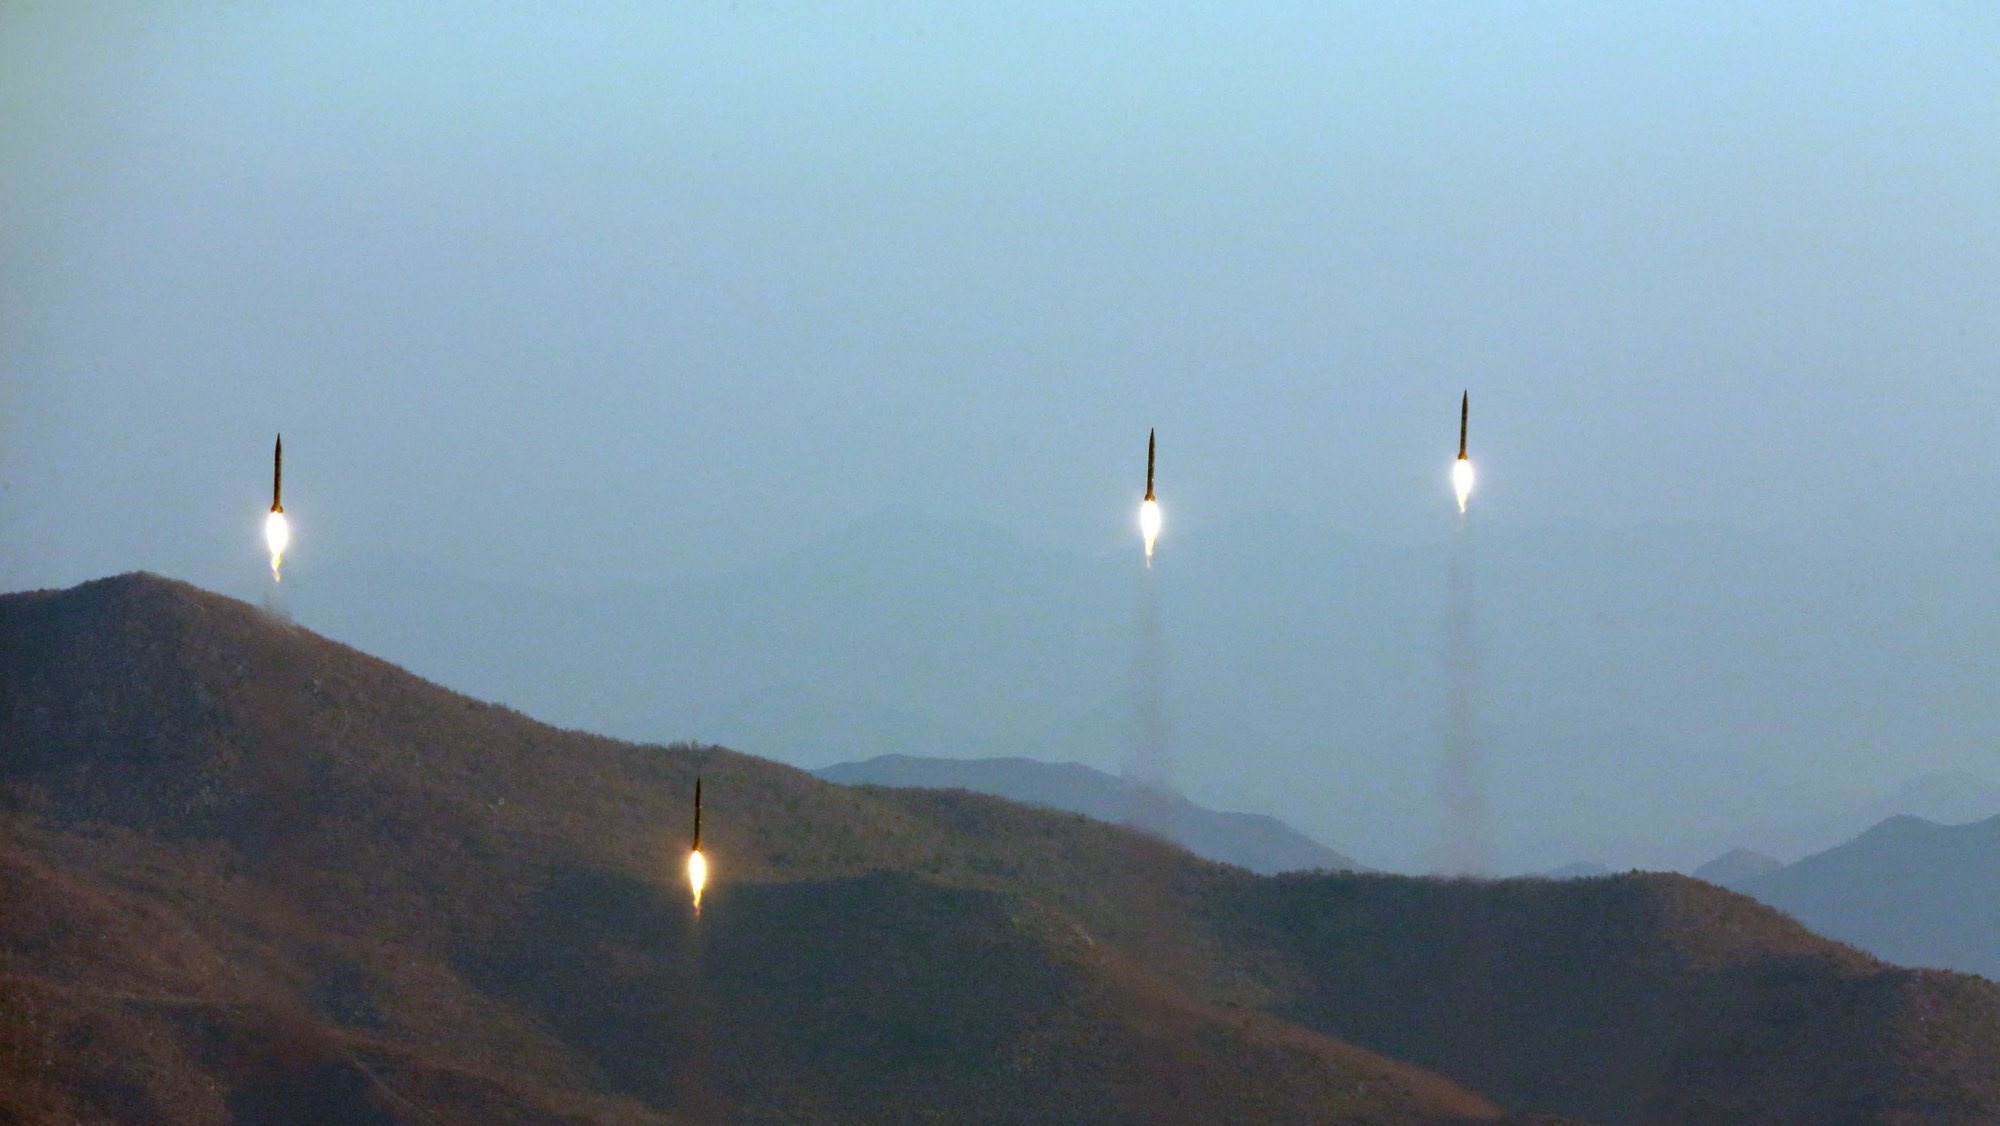 epa05934047 (FILE) - An undated file photo made available by the North Korean Central News Agency (KCNA), the state news agency of North Korea, on 07 March 2017, shows four projectiles during a ballistic rocket launching drill of Hwasong artillery units of the Strategic Force of the Korean People&#039;s Army (KPA) at an undisclosed location, According to media reports on 28 April 2017 state that North Korea has test-fired a ballistic missile an area just north of Pyongyang. US Secretary of State Rex Tillerson warned on 28 April 2017 that failure to curb North Korea&#039;s nuclear and missile development could lead to &#039;catastrophic consequences.&#039;  EPA/KCNA   EDITORIAL USE ONLY/NO SALES *** Local Caption *** 53402522